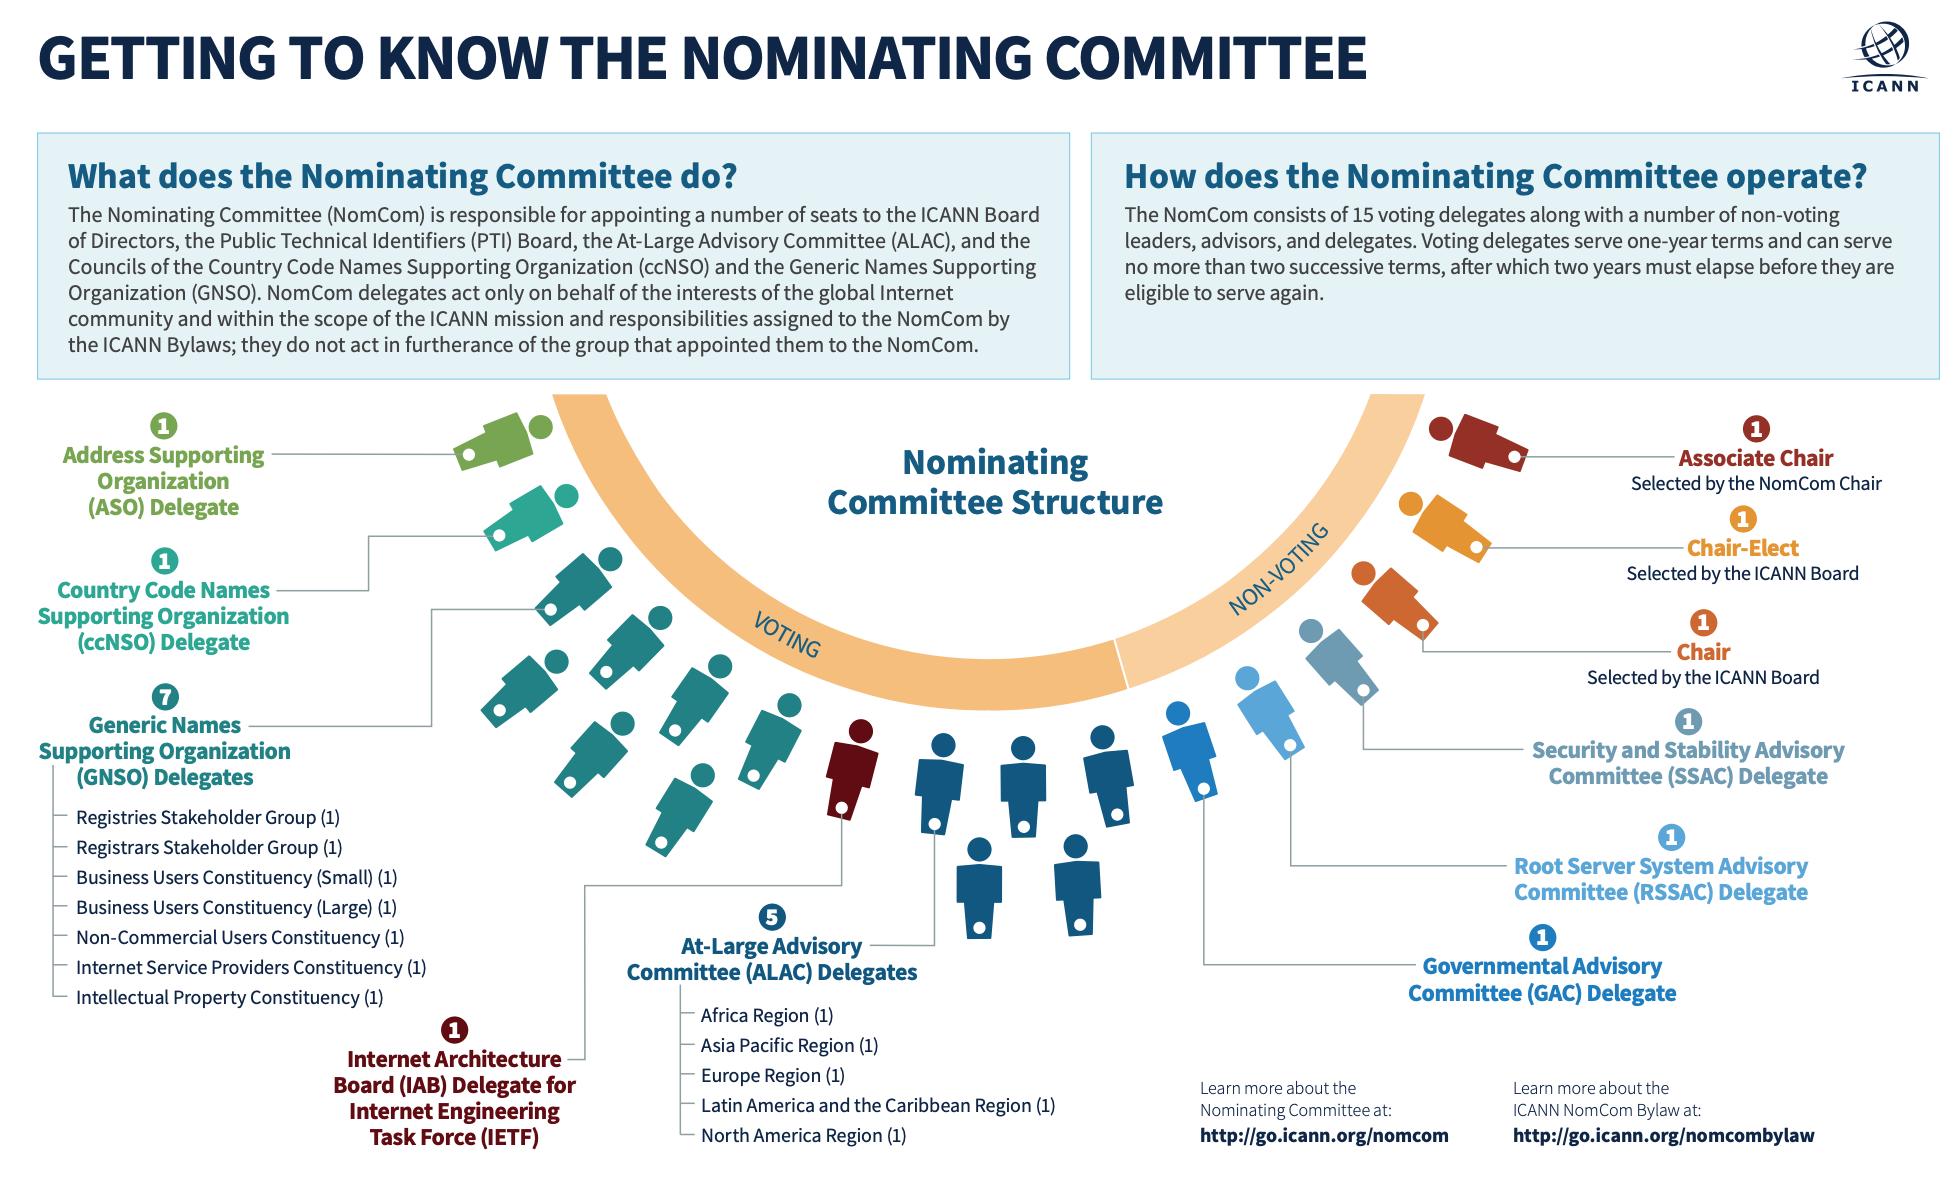 An infographic explaining what the Nominating Committee does and how it operates.